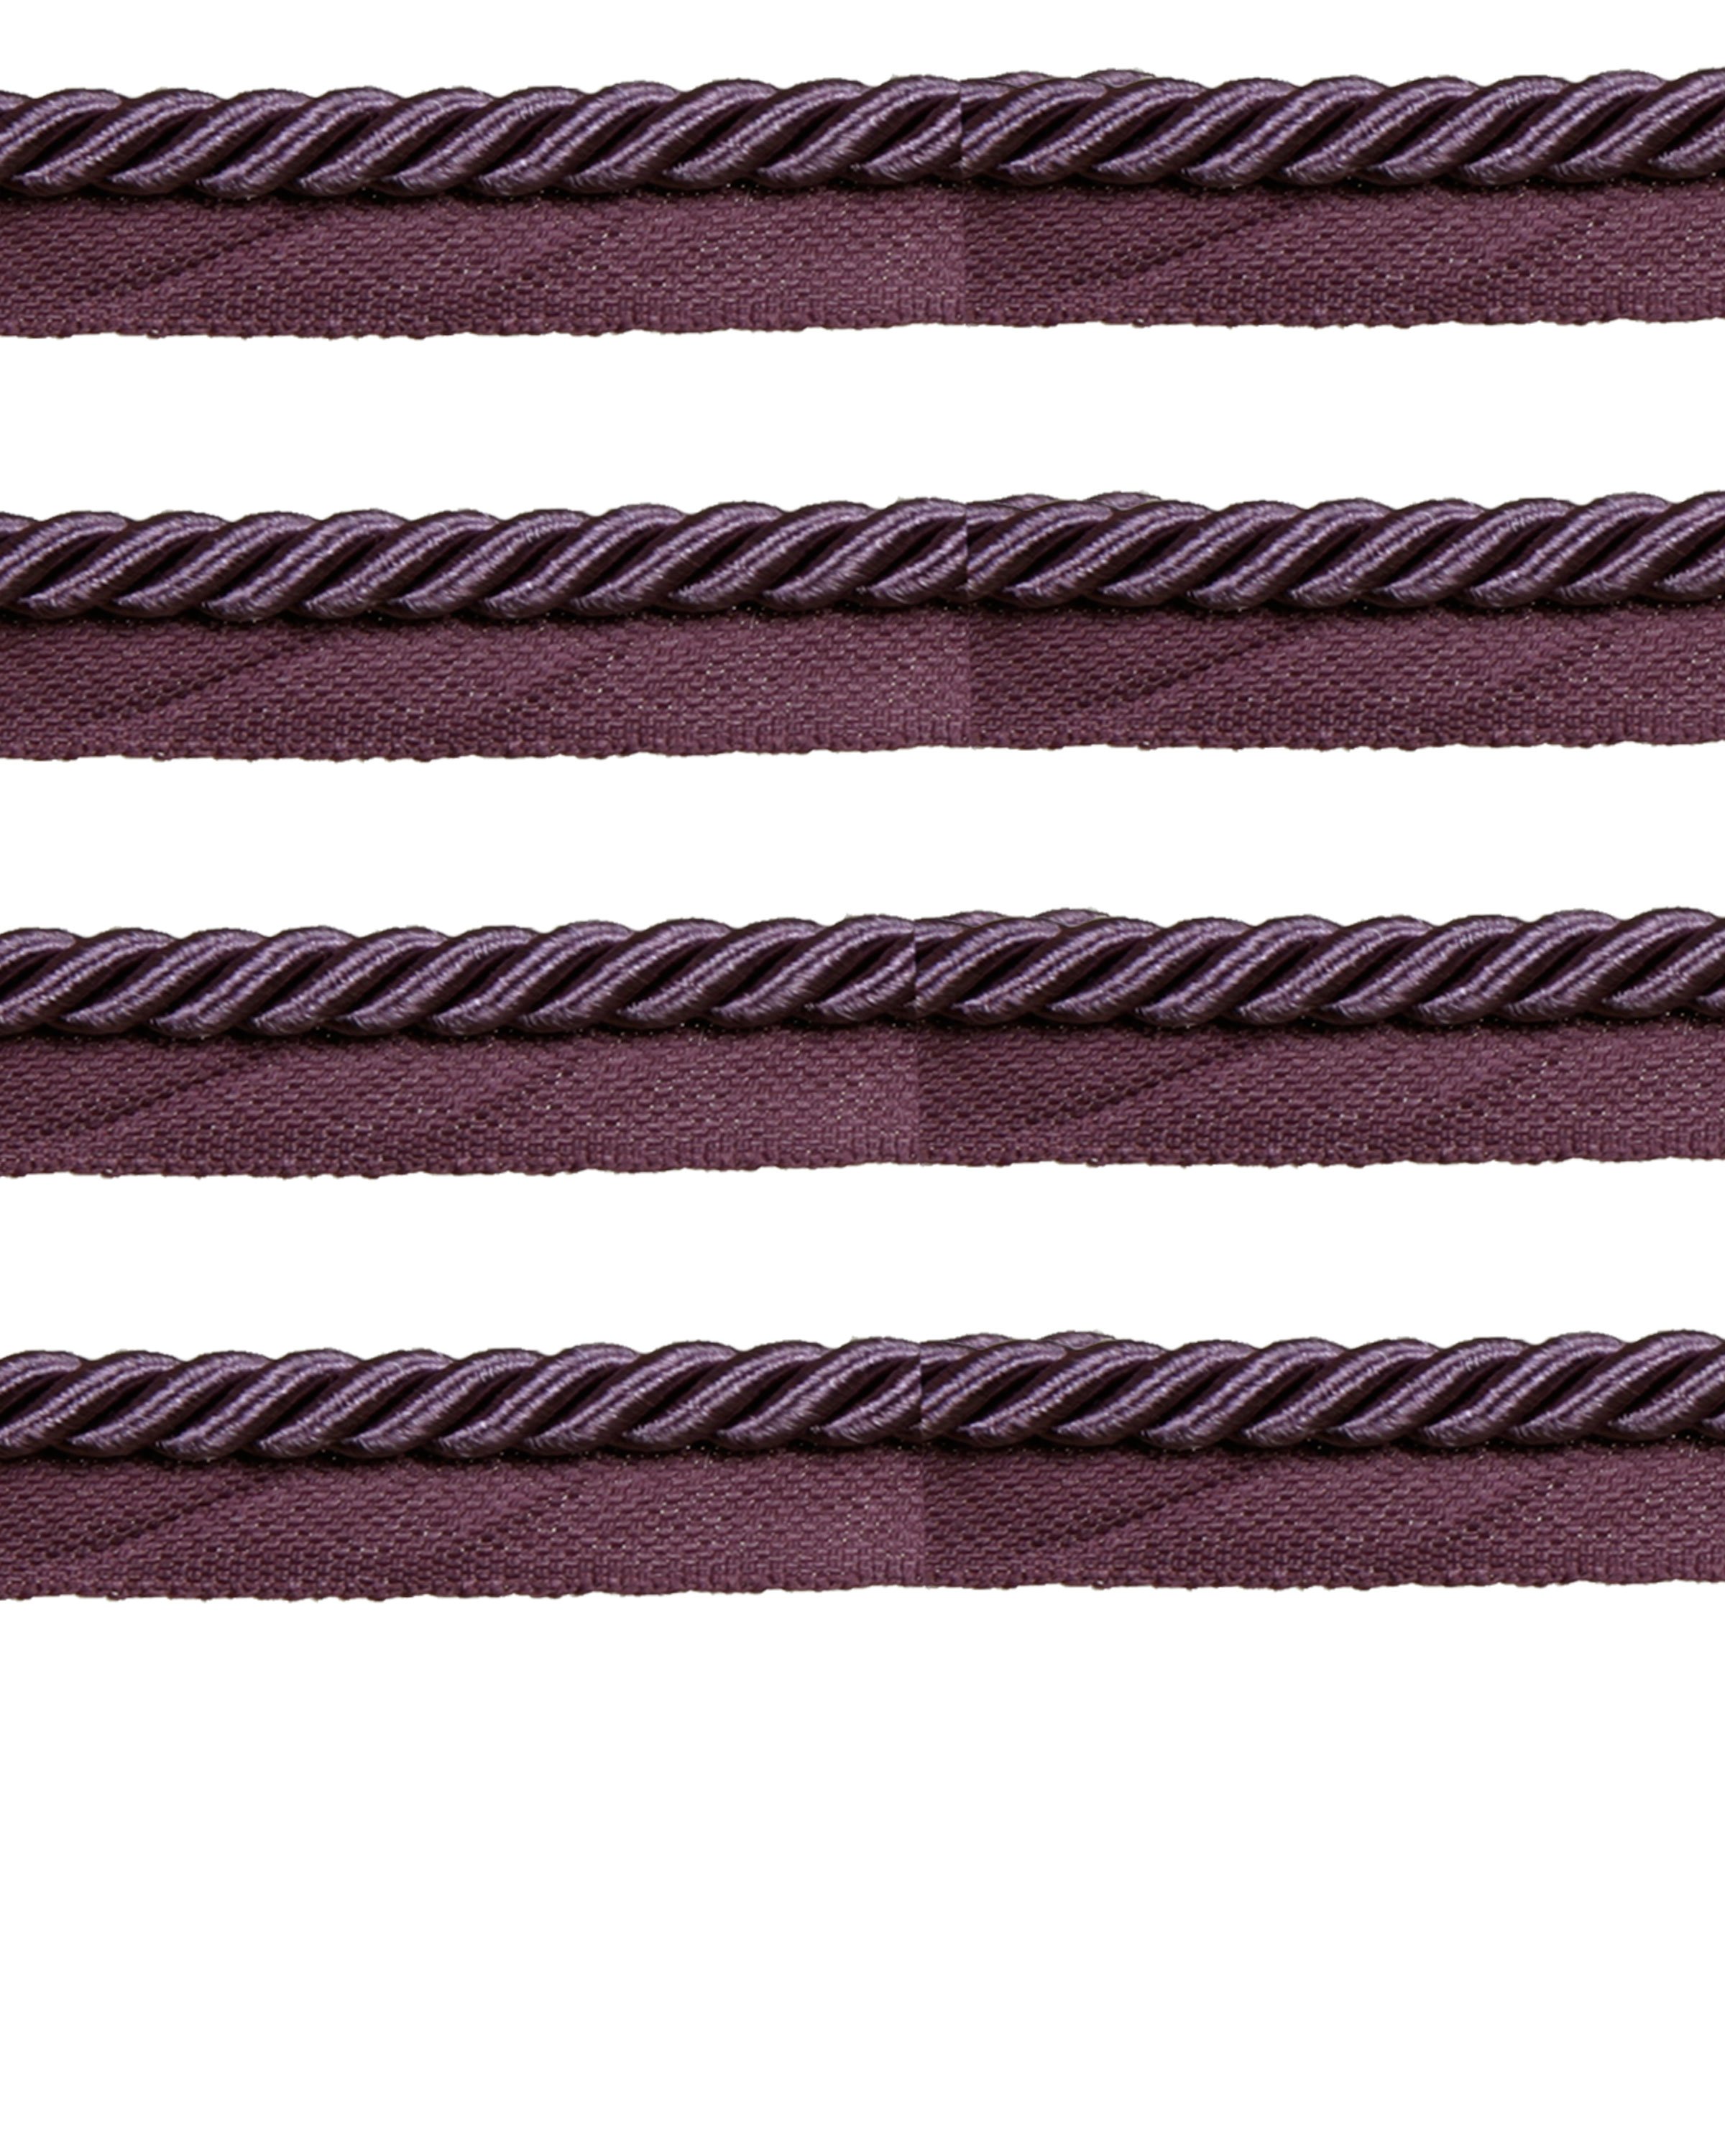 Piping Cord 8mm on Tape - Purple Price is for 5 metres